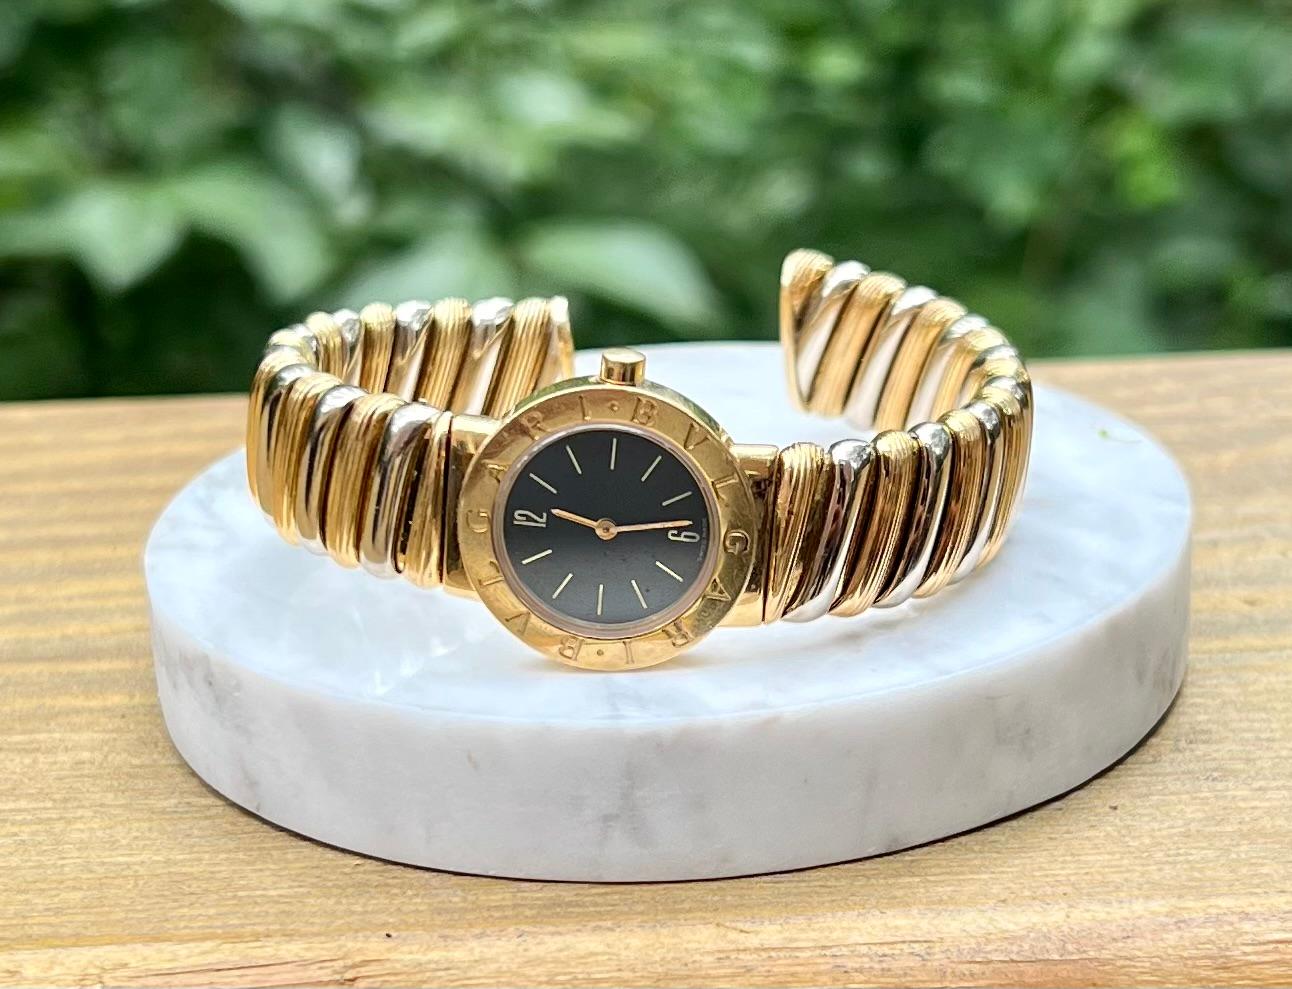 One 18 Karat yellow and white gold Bvlgari wristwatch bangle with a polished finish. The case is in yellow gold with a polished finish and has BVLGARI engraved around the bezel. Black dial with gold-tone hands. The band is two-tone gold and is 15mm